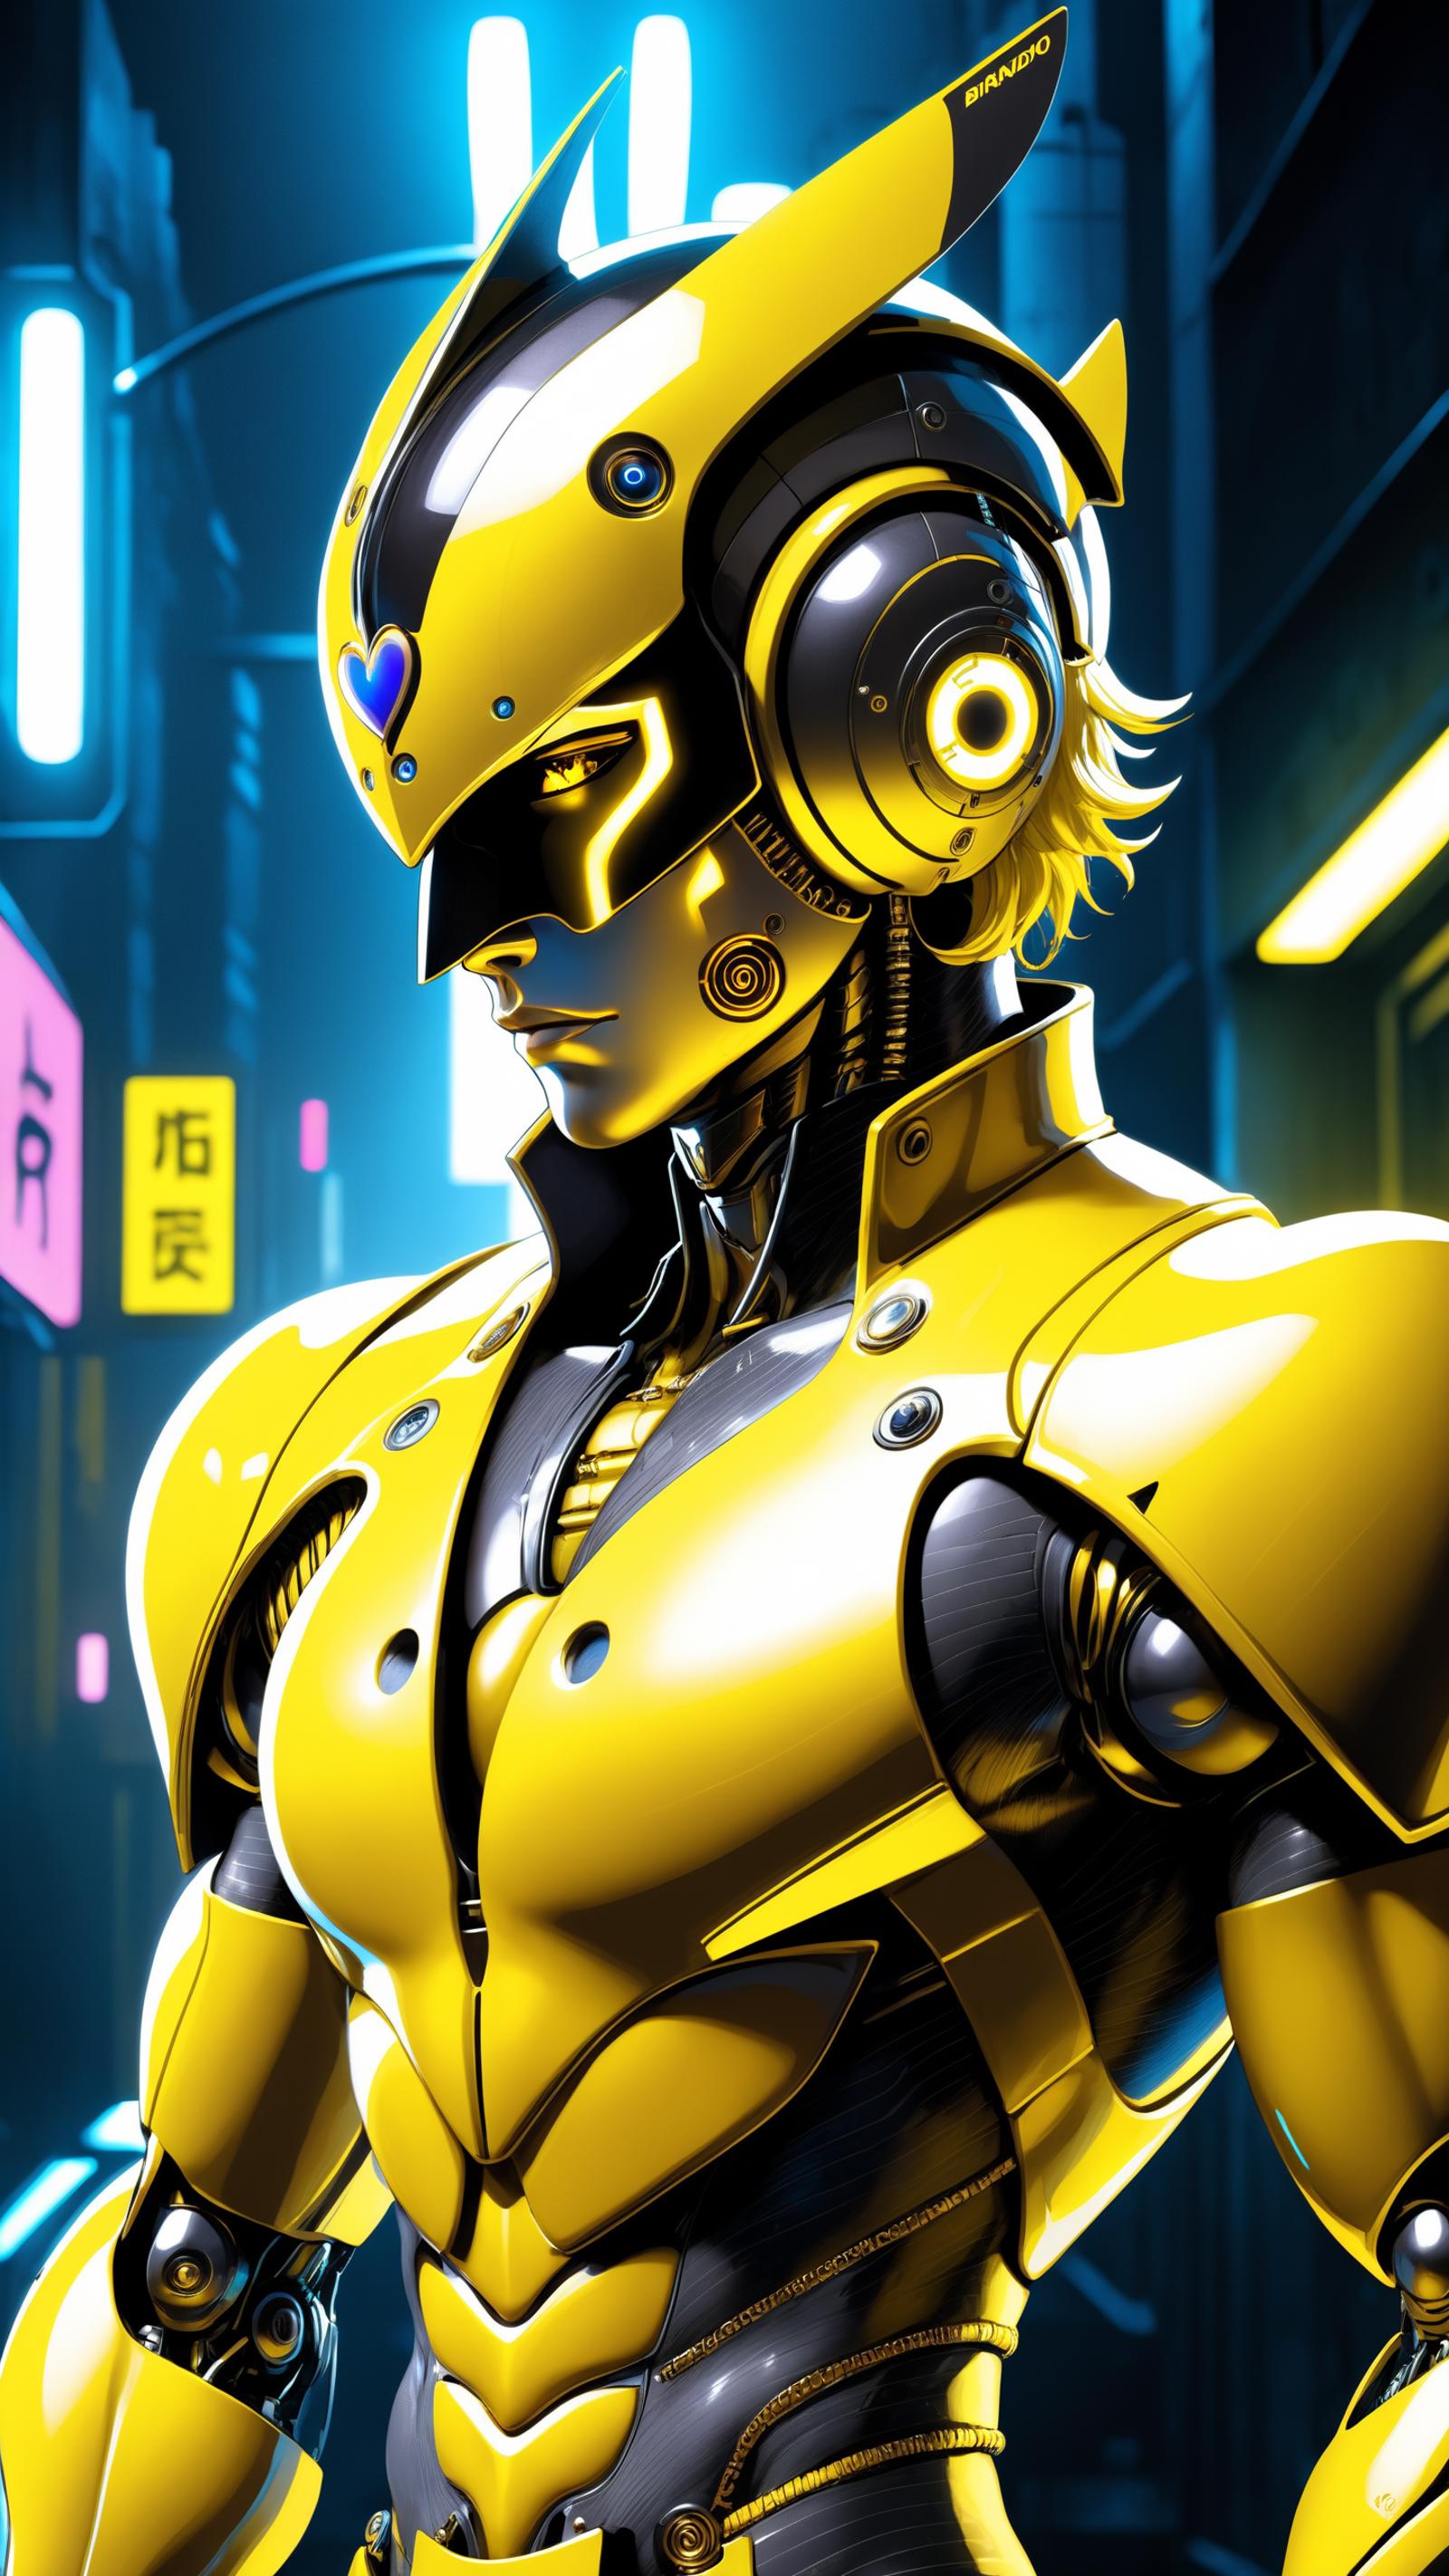 A futuristic robot character wearing a yellow top and headphones.